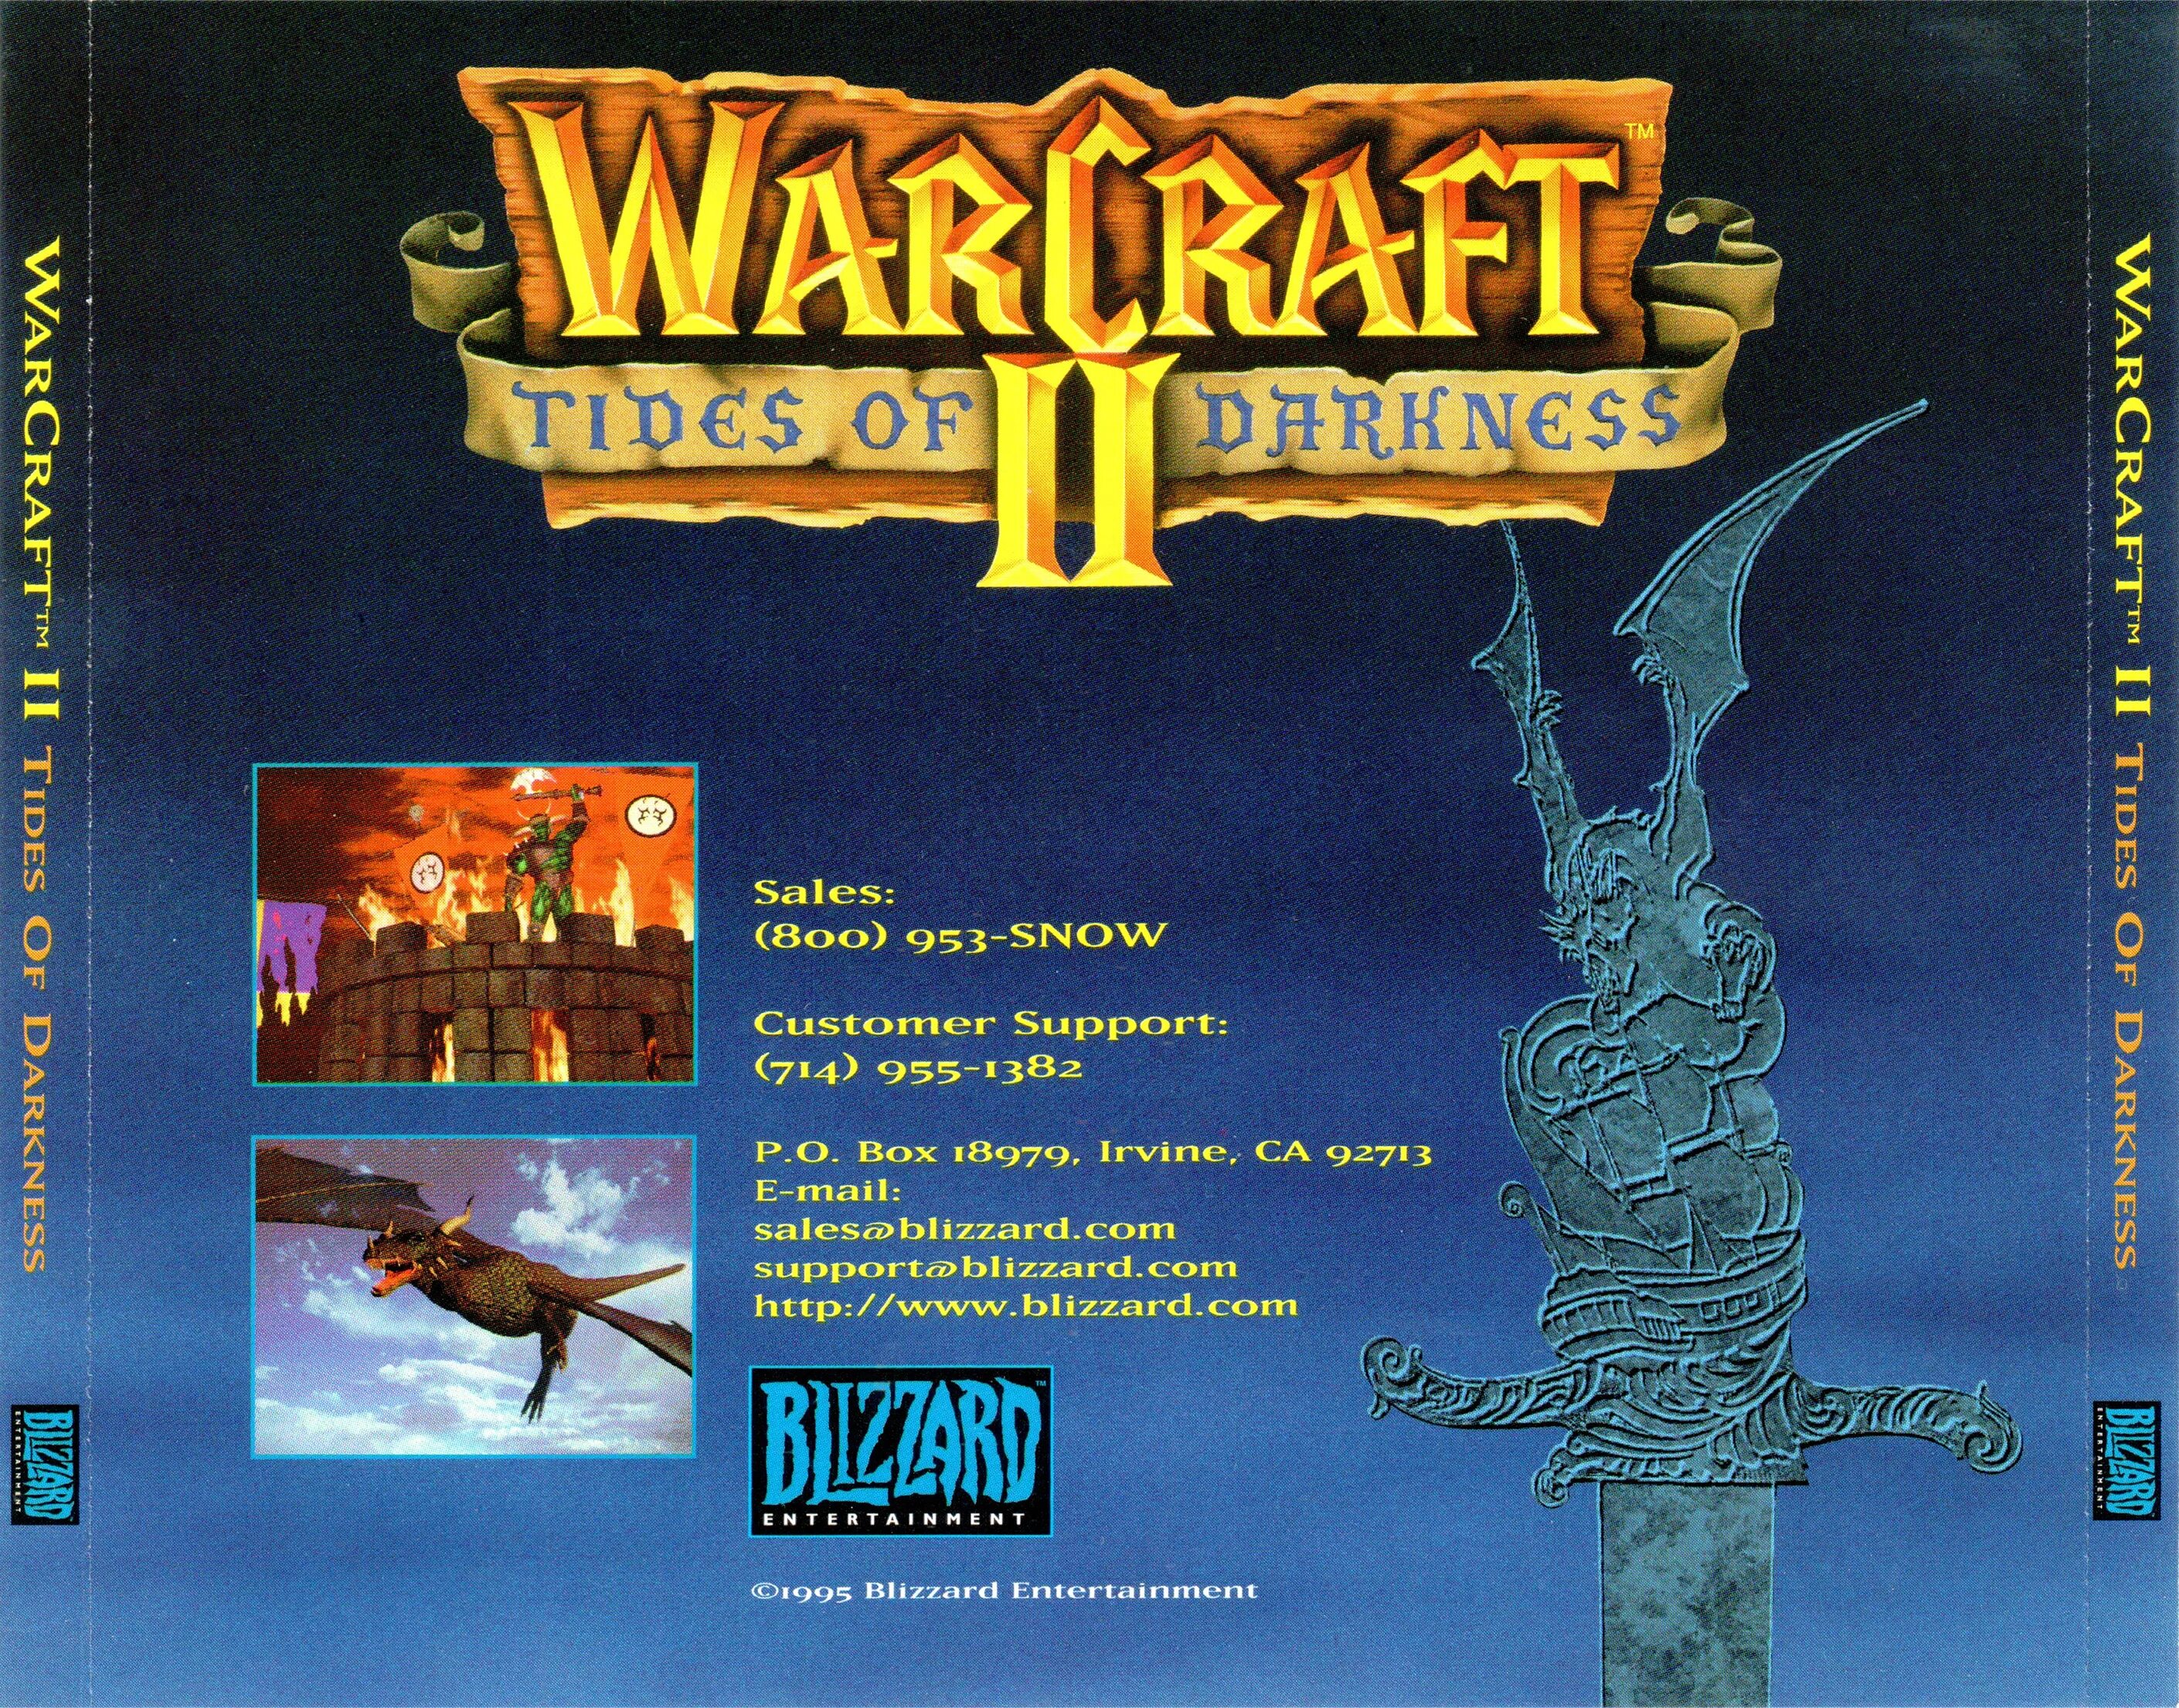 Csw tides of darkness. Warcraft 2 Tides of Darkness. Warcraft 2 Tides of Darkness игра. Warcraft II: Tides of Darkness обложка. Warcraft 2 Tides of Darkness обложка.